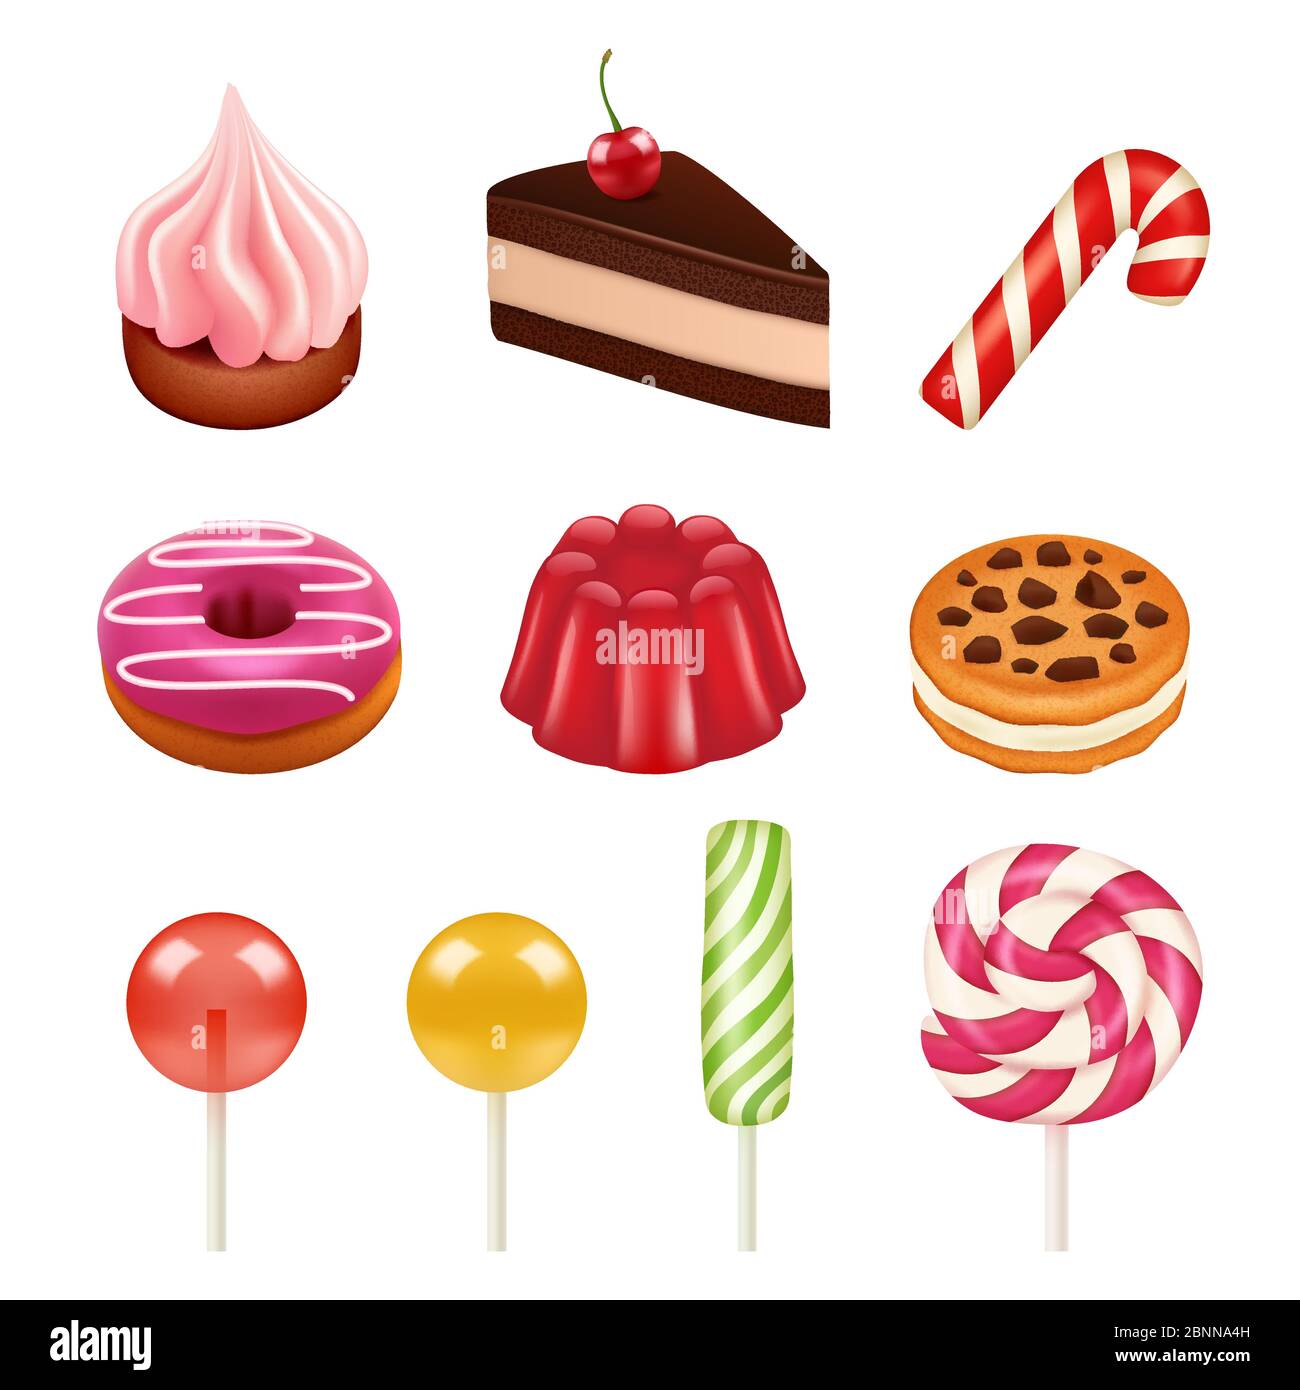 Sweets and candy pictures. Objects from sugar, dulce caramel candy and chocolate sweets vector illustrations isolate Stock Vector